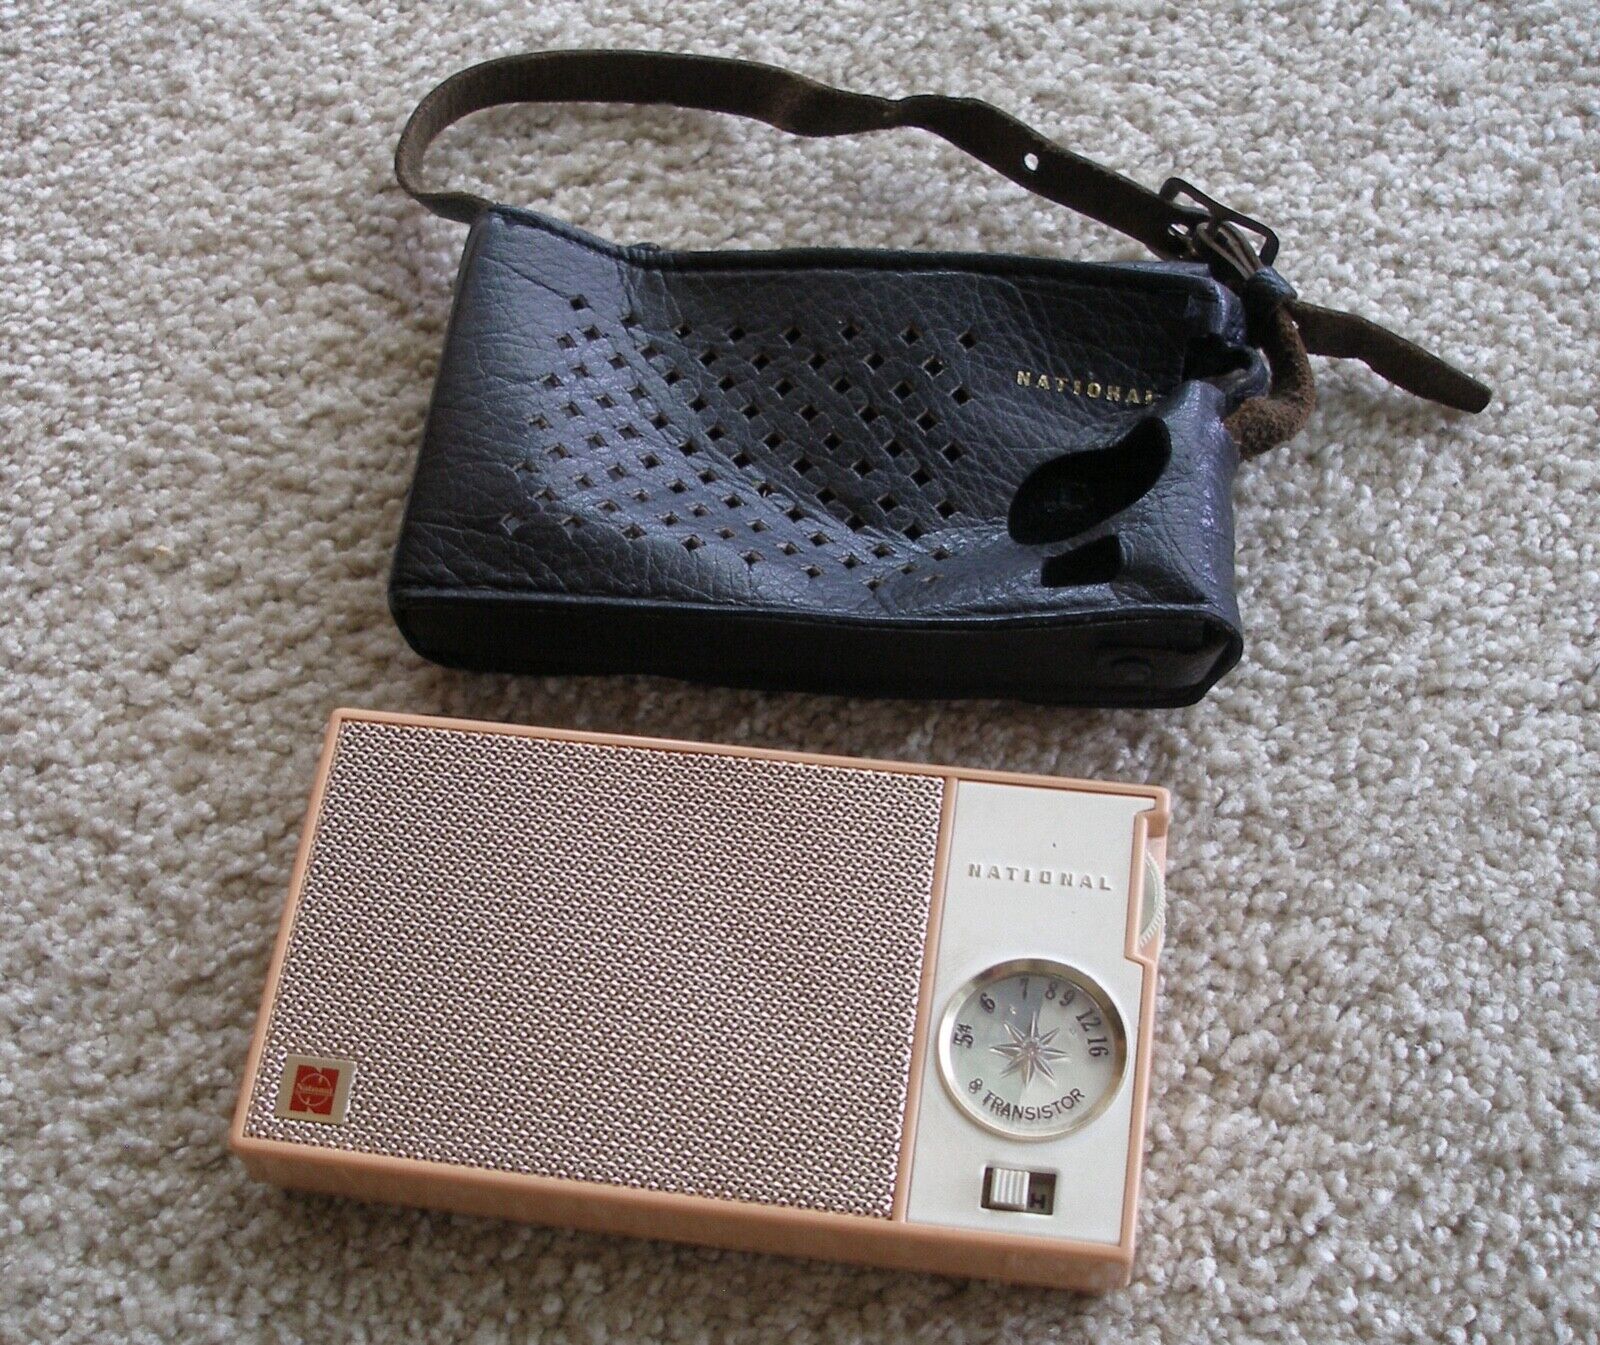 Vintage National 8 Transistor Model T-12 Radio w Carrying Case - Nice Cosmetics